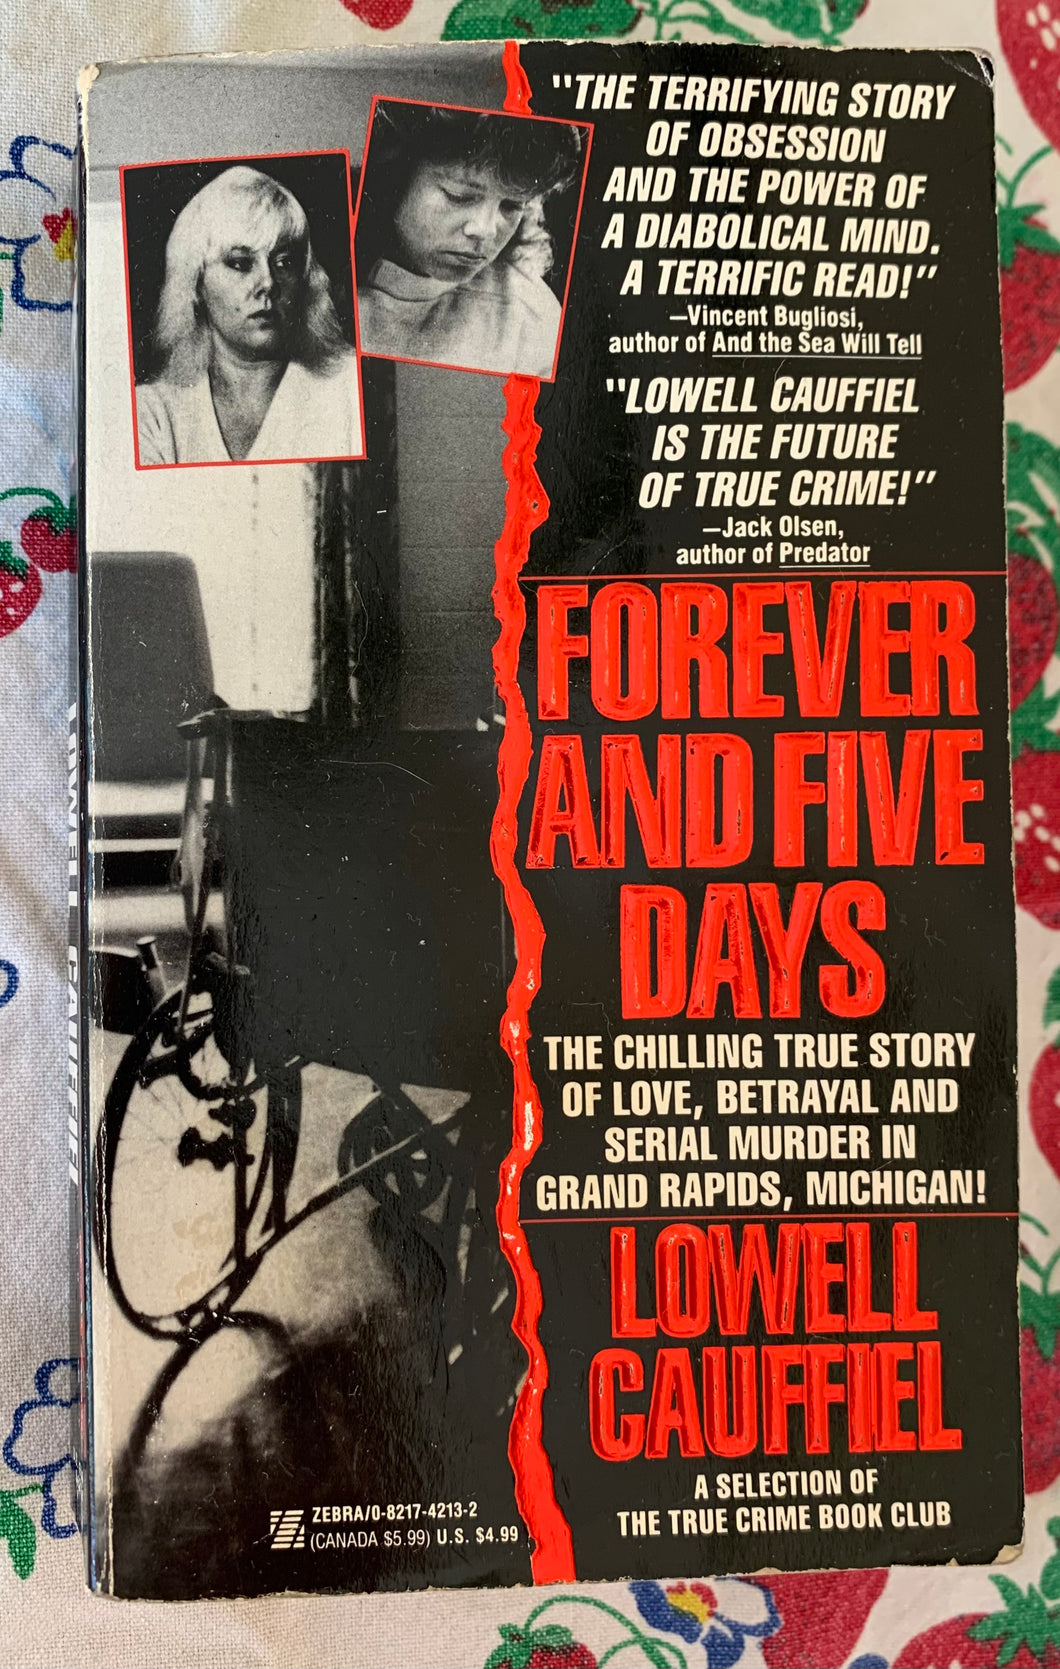 Forever And Five Days: The Chilling True Story Of Love, Betrayal And Serial Murder In Grand Rapids, Michigan!